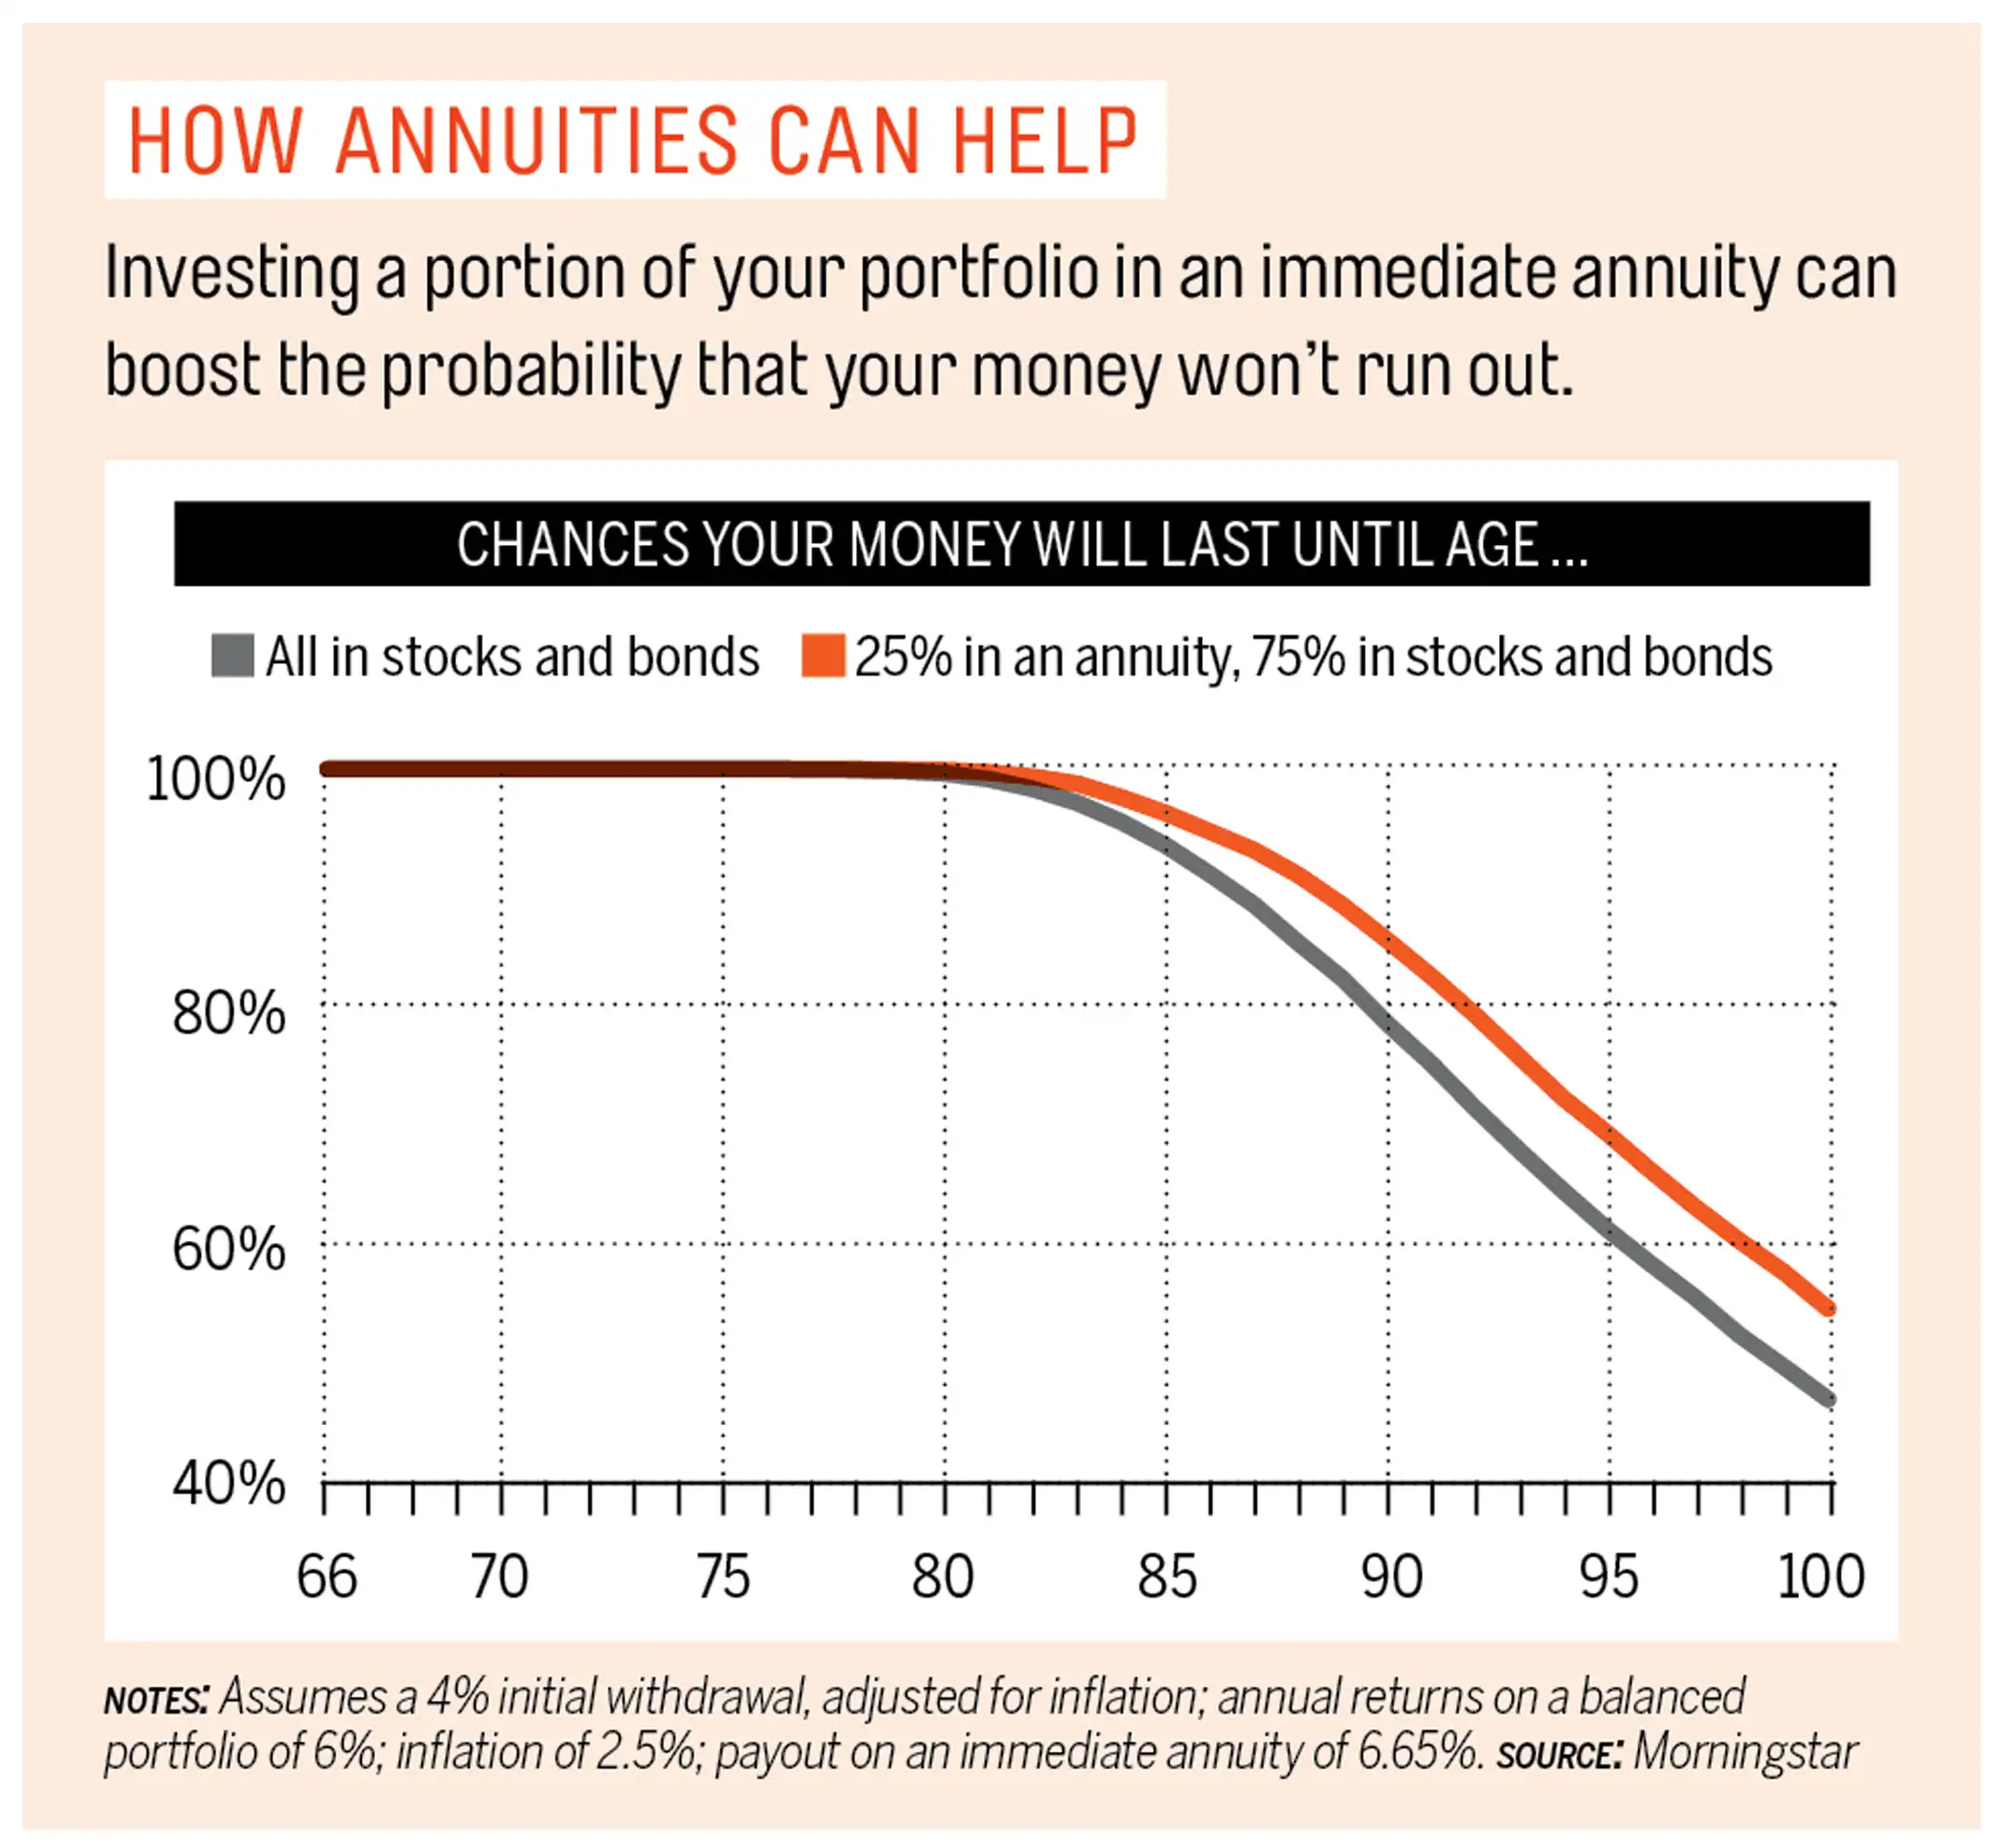 How annuities can help